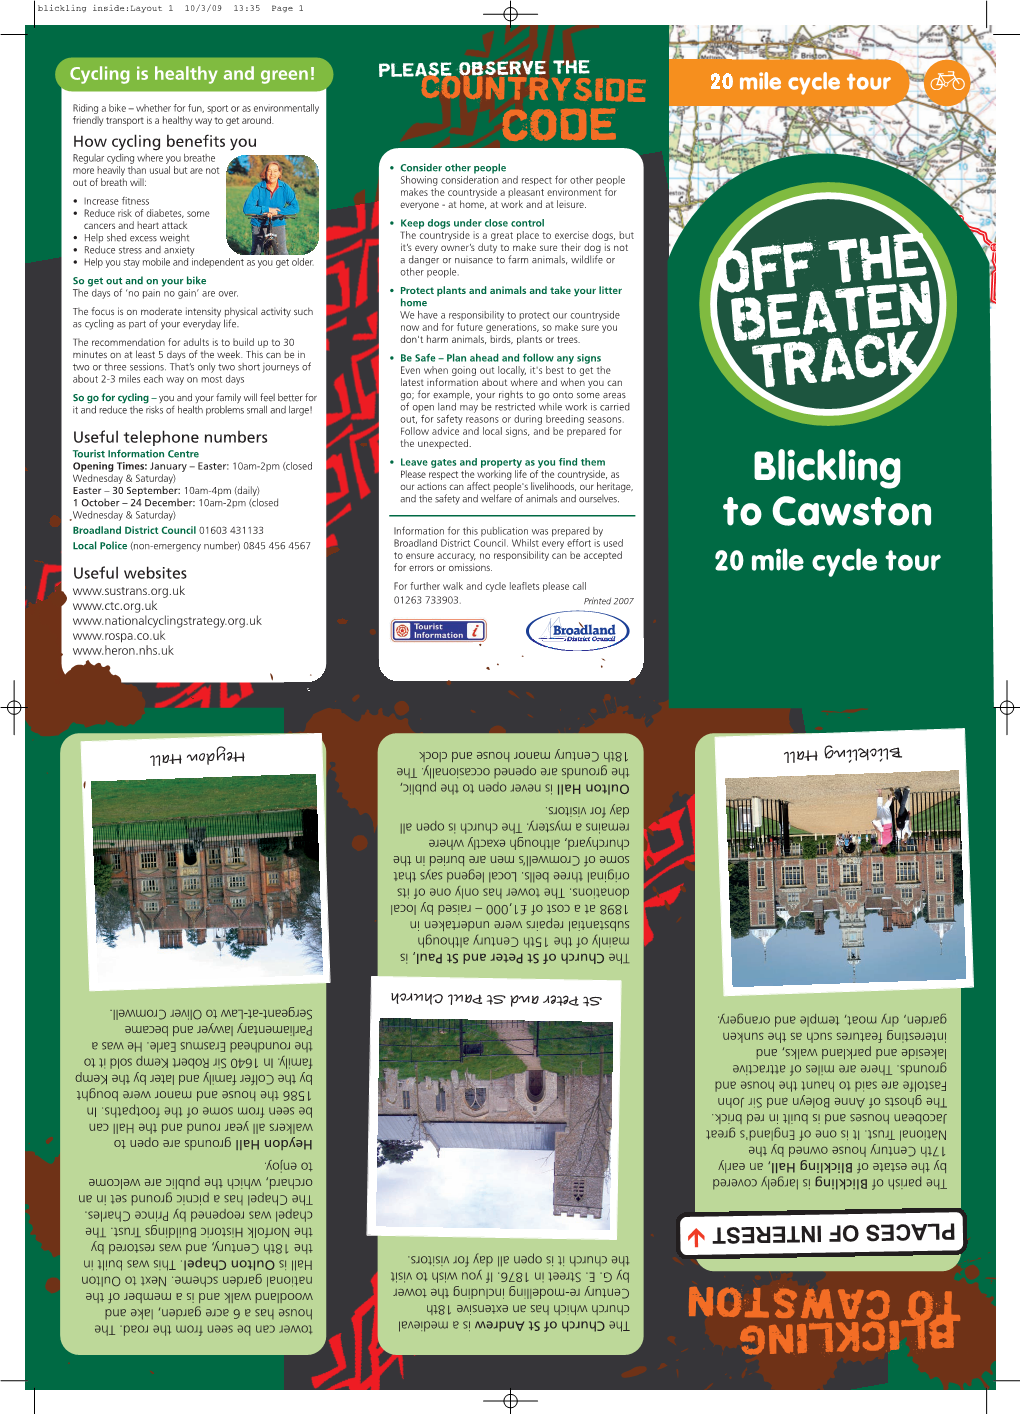 Off the Beaten Track Leaflet